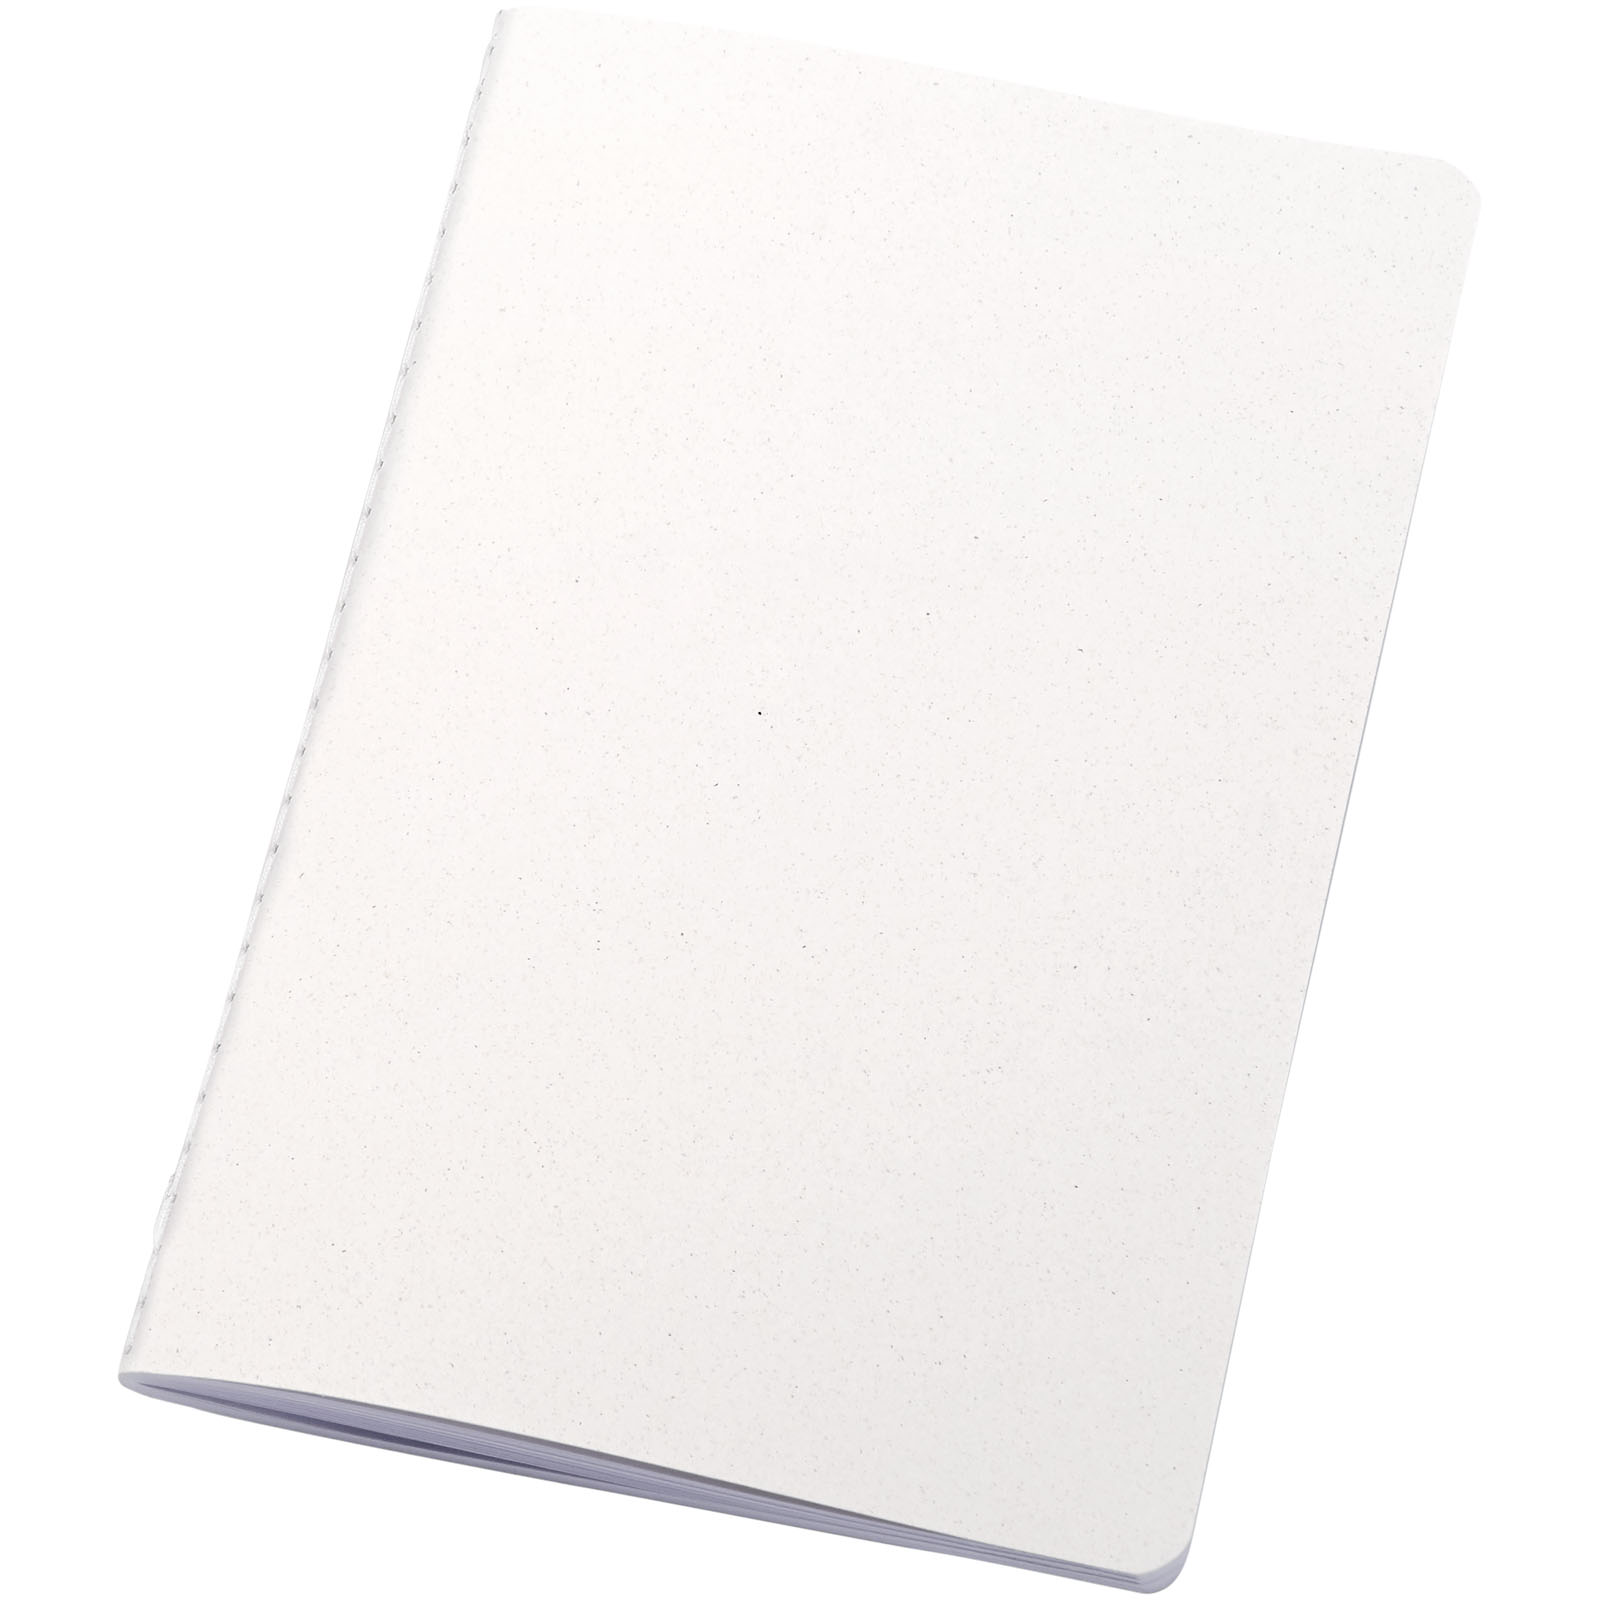 Advertising Notebooks - Fabia crush paper cover notebook